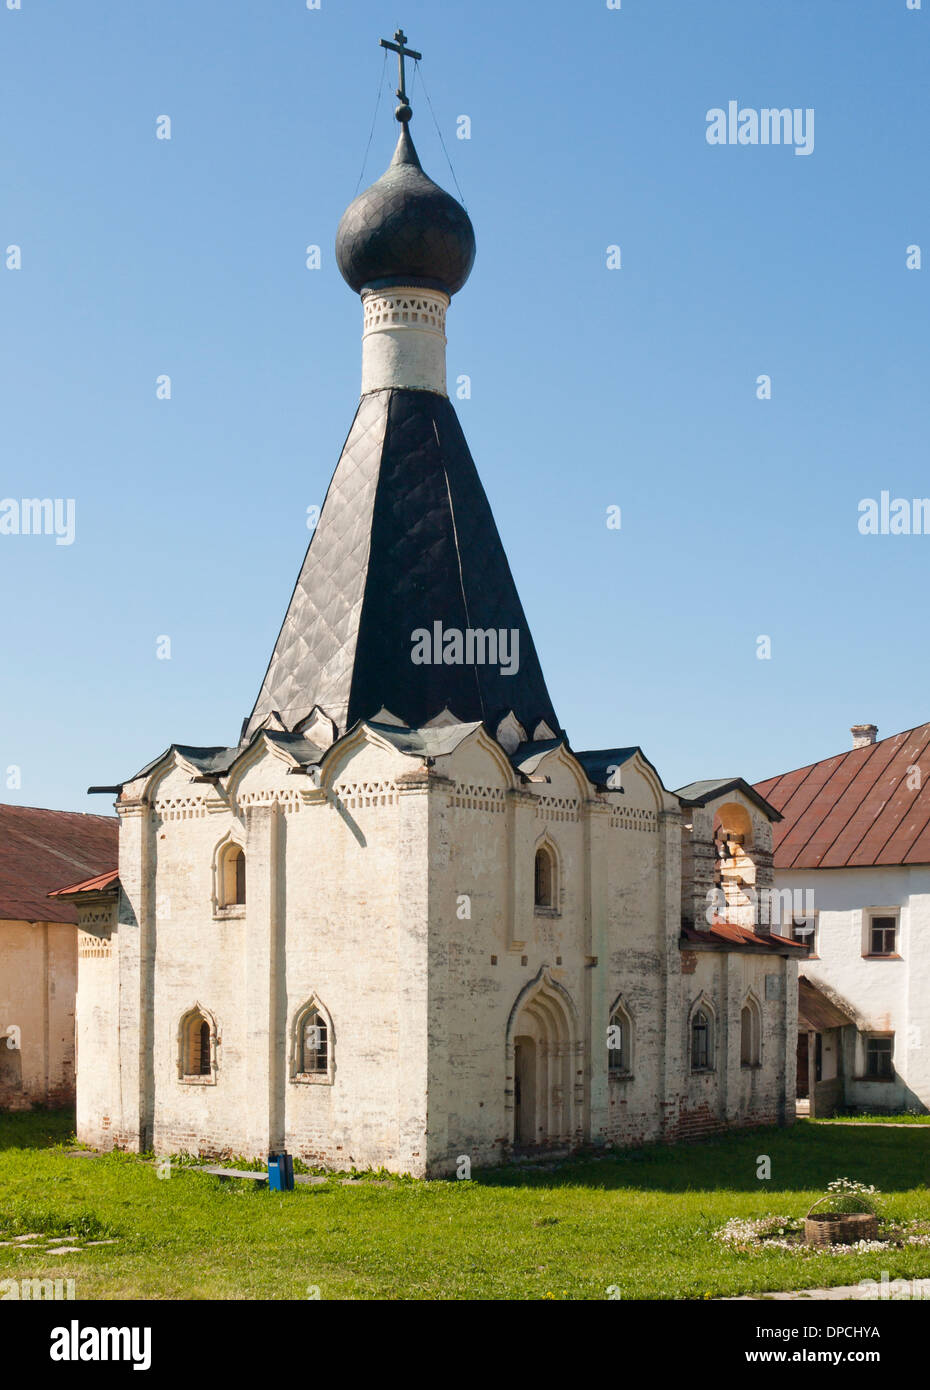 Kirillo-Belozersky Monastery near the village of Goritzy Russia founded by Saint Cyril, connected with the Cyrillic alphabet Stock Photo